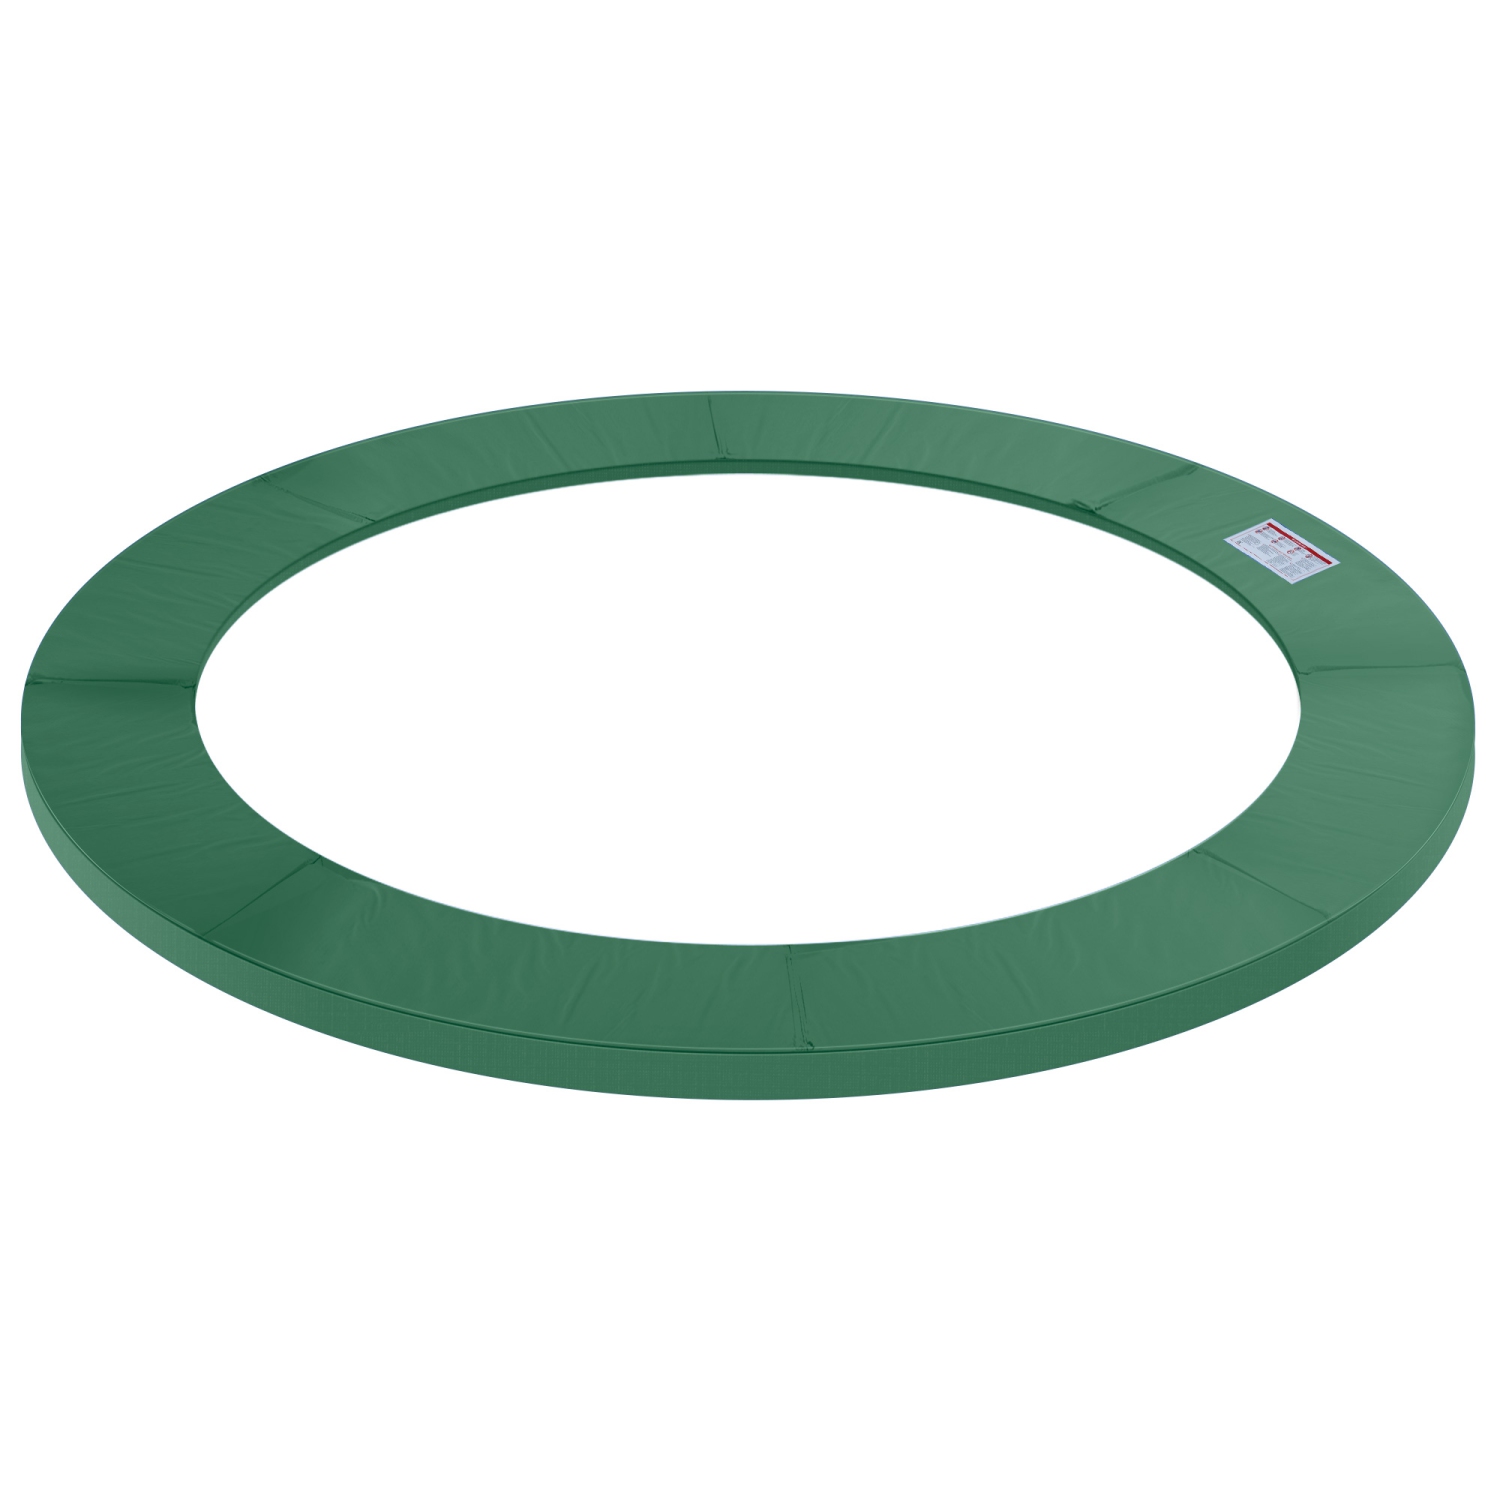 HOMCOM Φ10ft Trampoline Pad, Φ120" Trampoline Replacement Safety Pad, Waterproof Shock Absorbent Spring Cover, Green